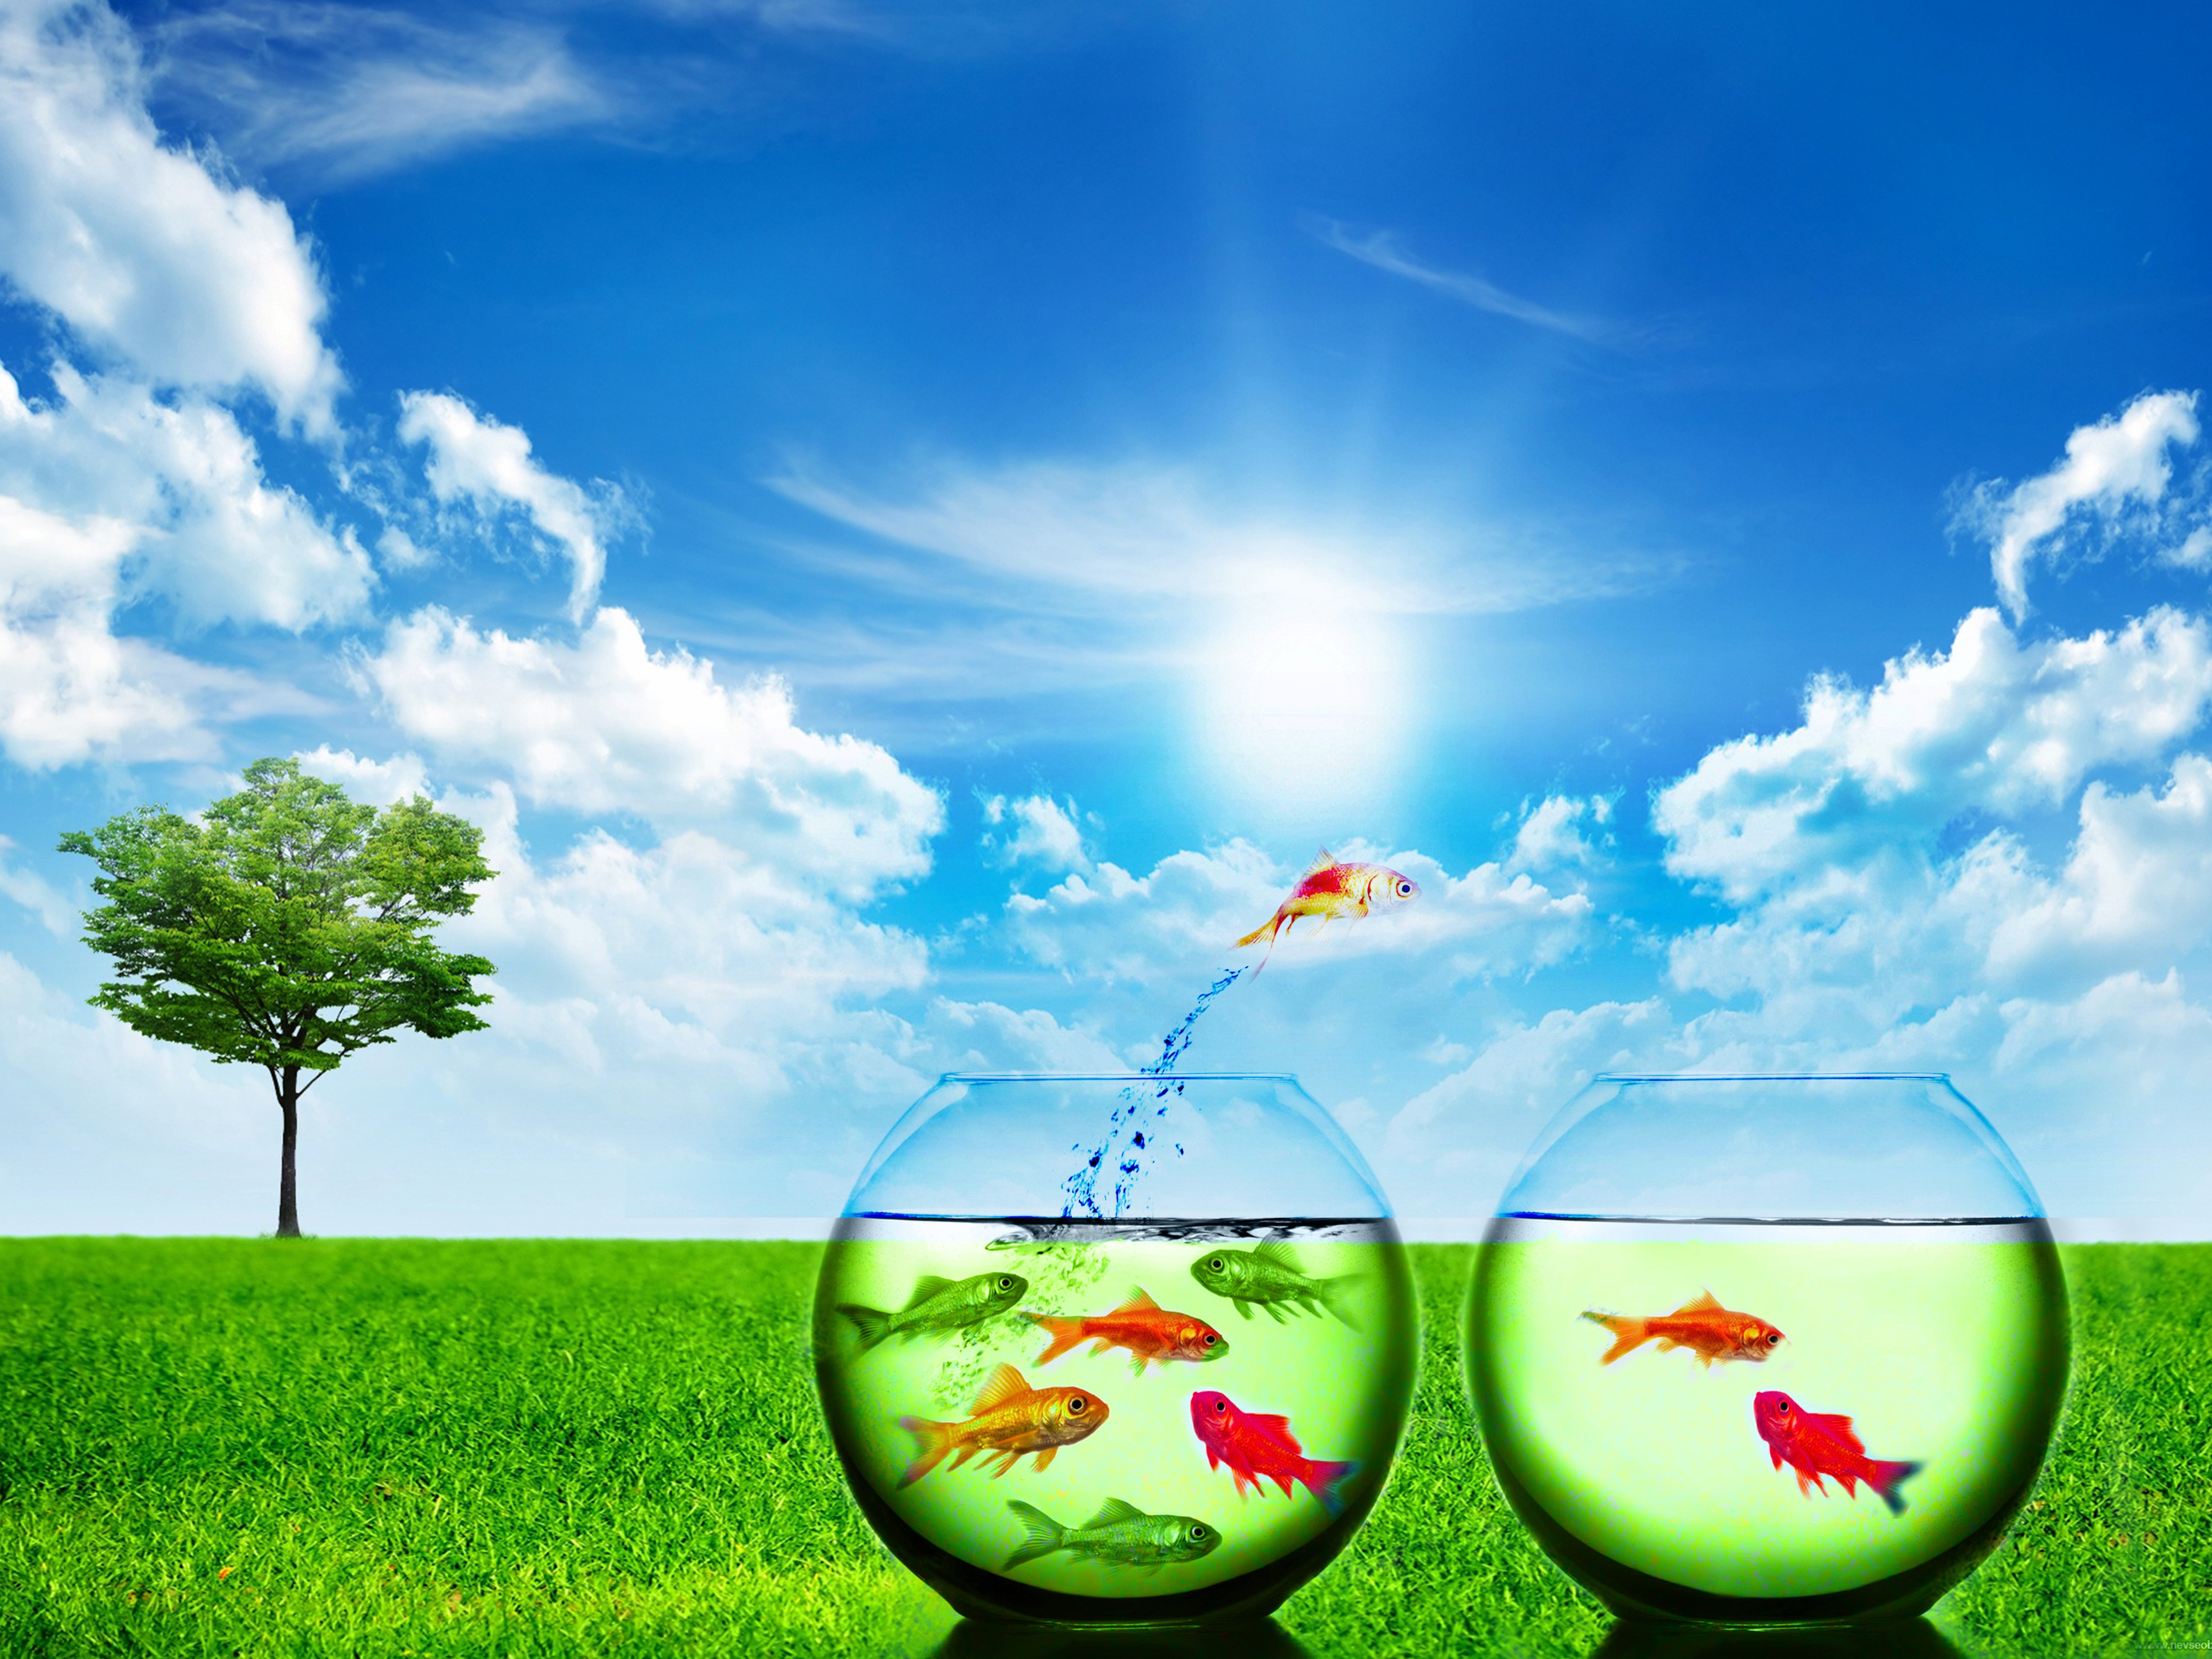 Nature Wallpaper With Two Bowls Having Water Inside And Fish